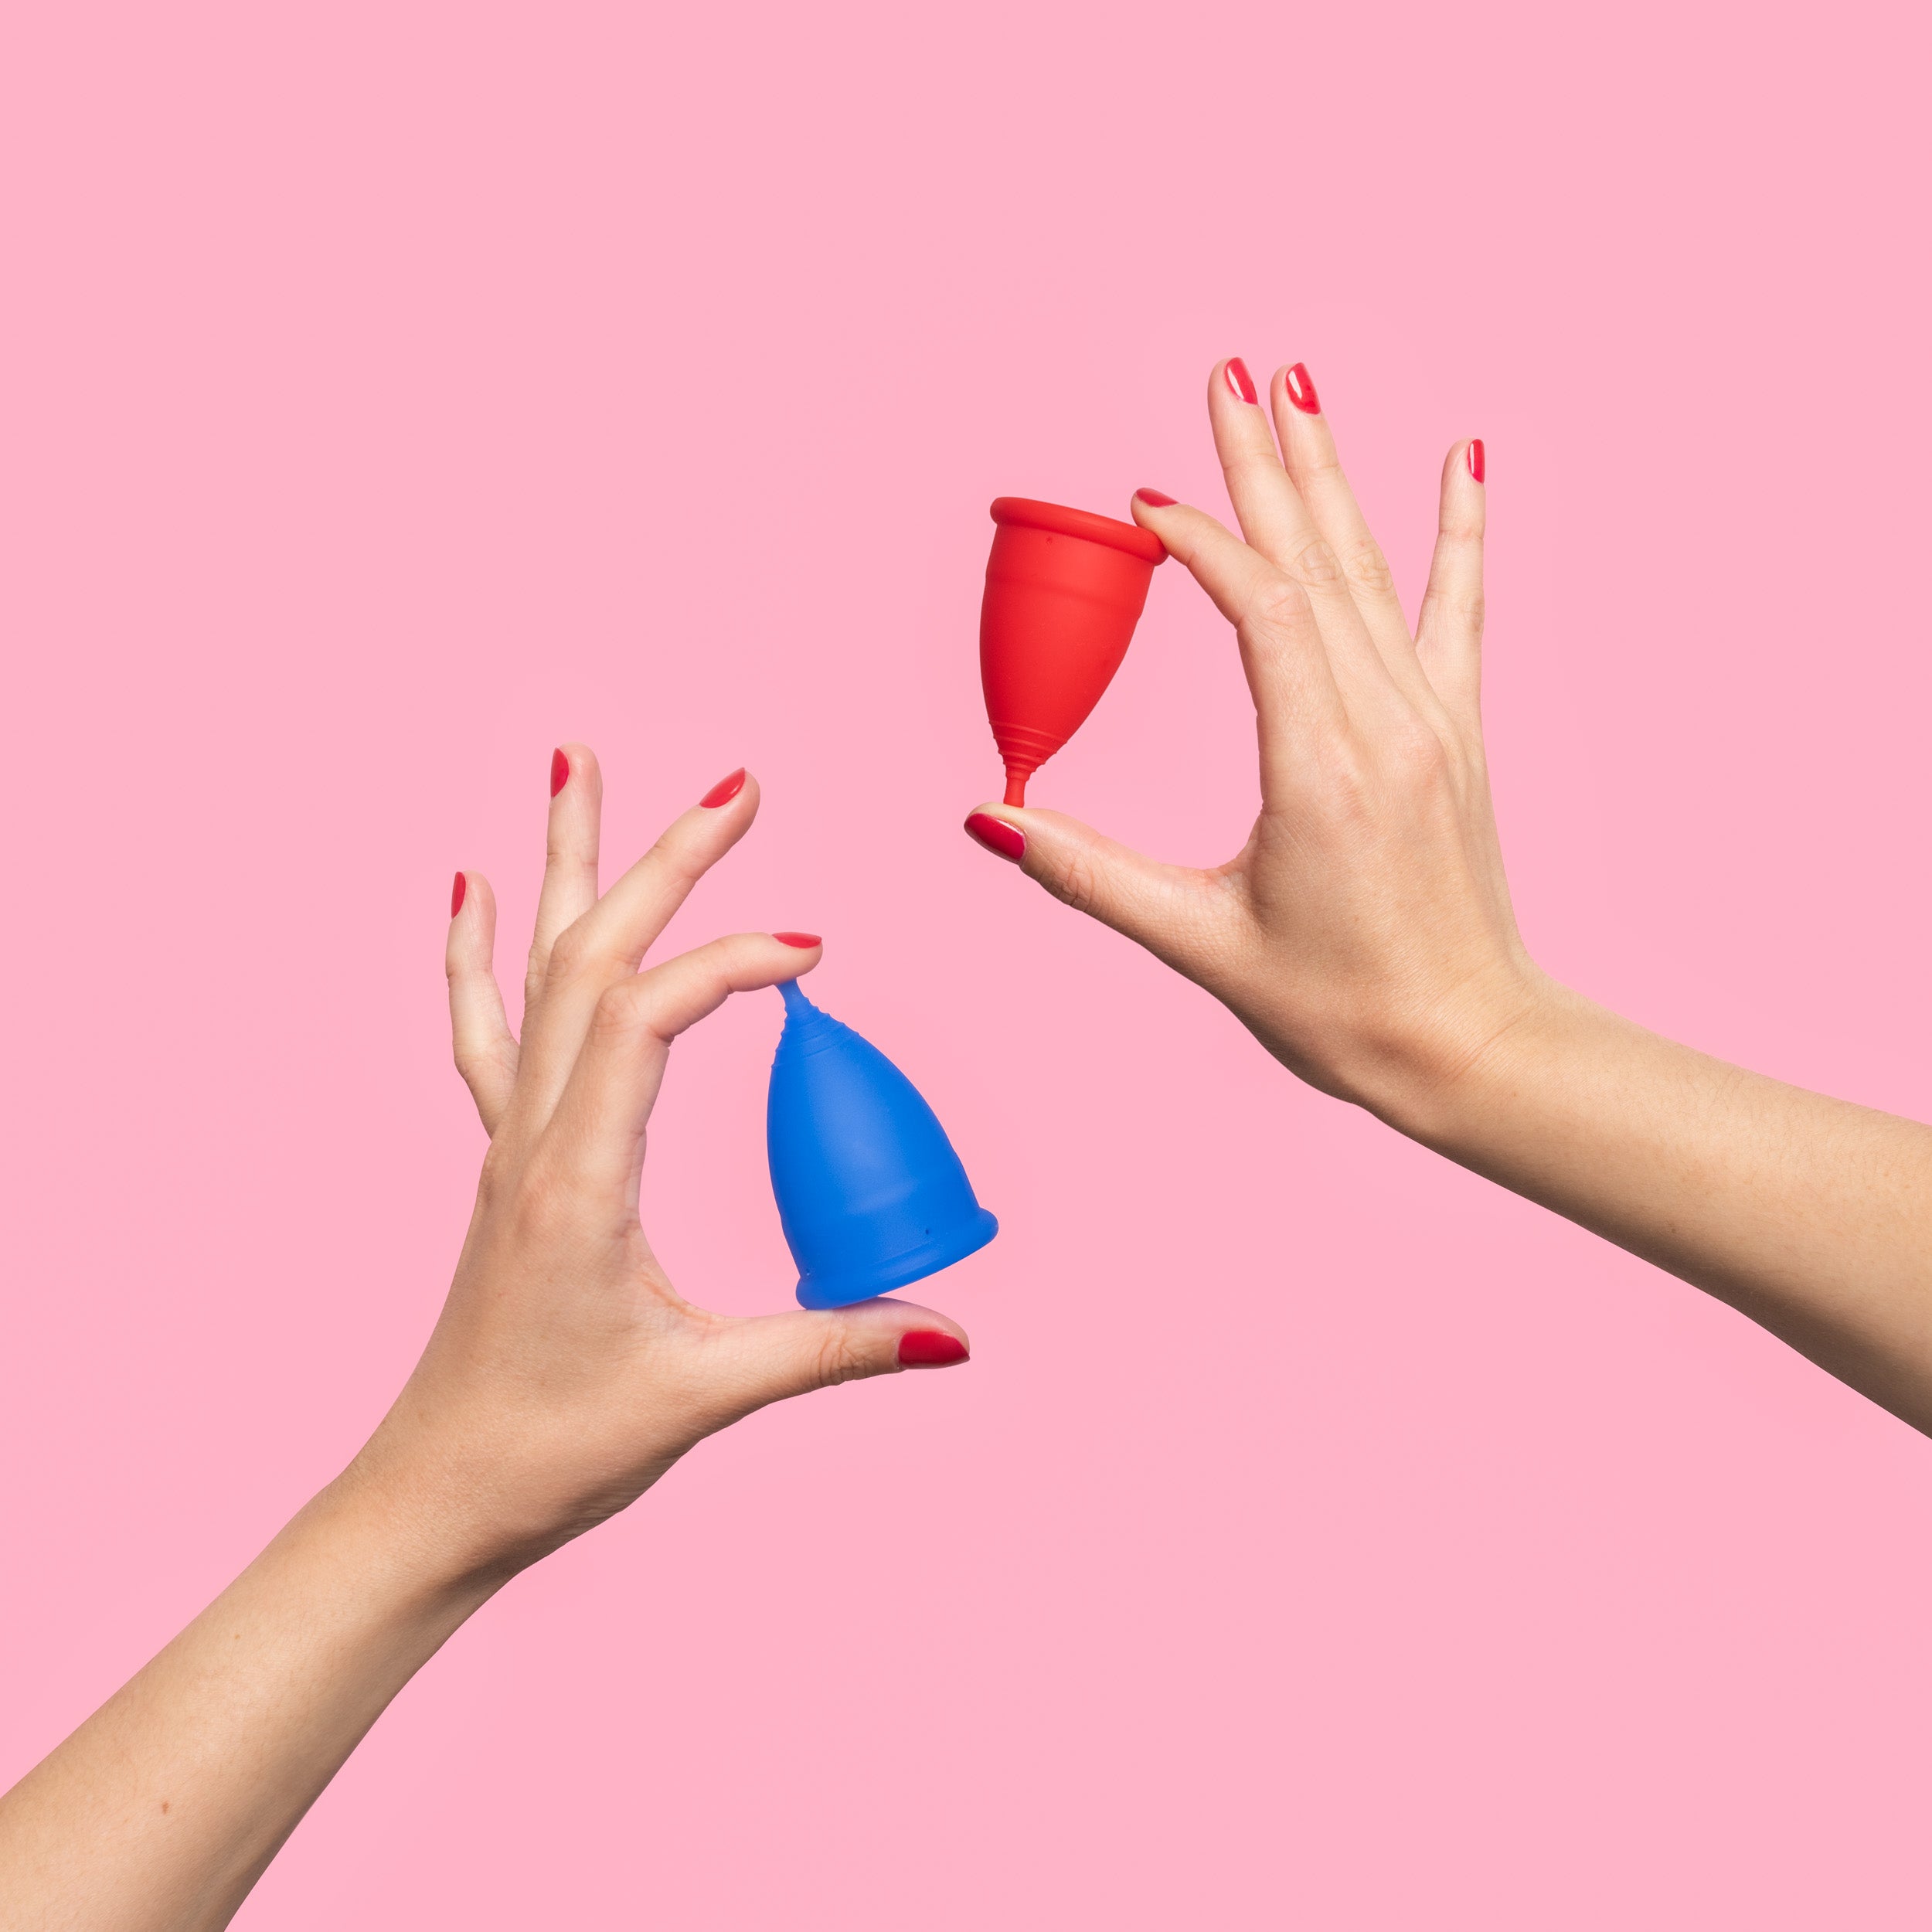 A Better Way to Manage Your Period? Try the Menstrual Cup